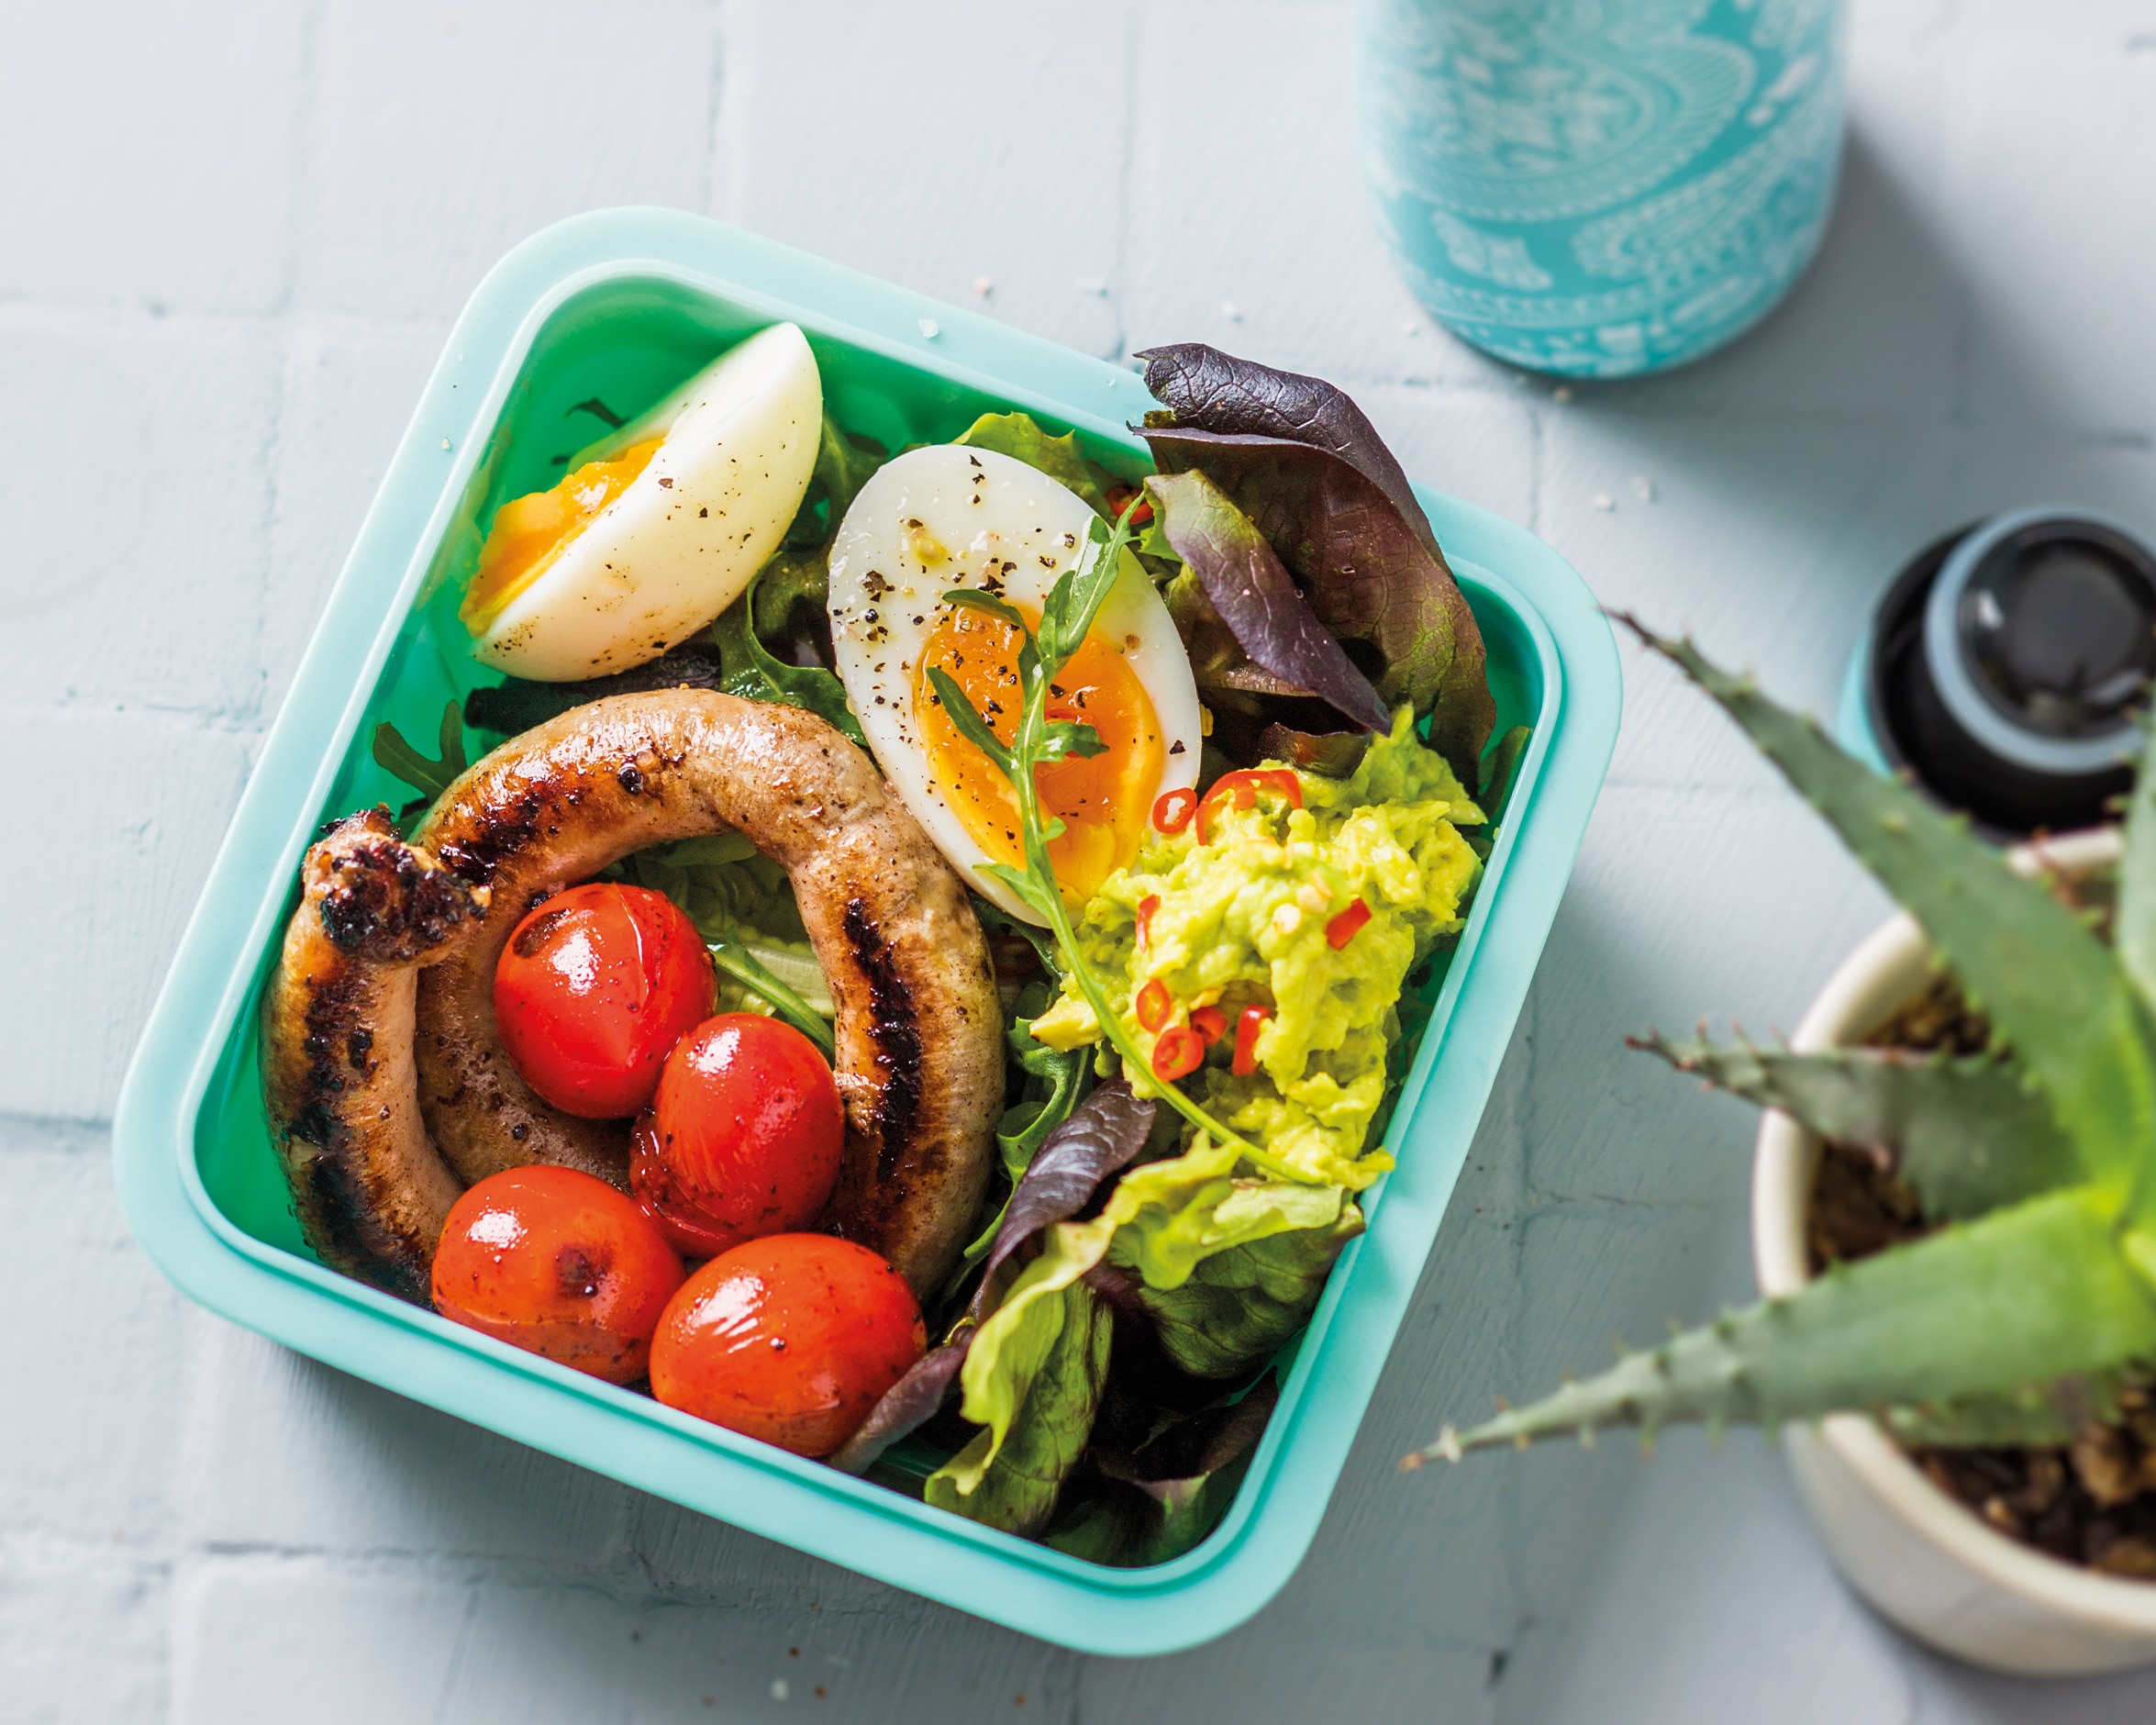 You are currently viewing Yummy and nutritious lunchbox ideas